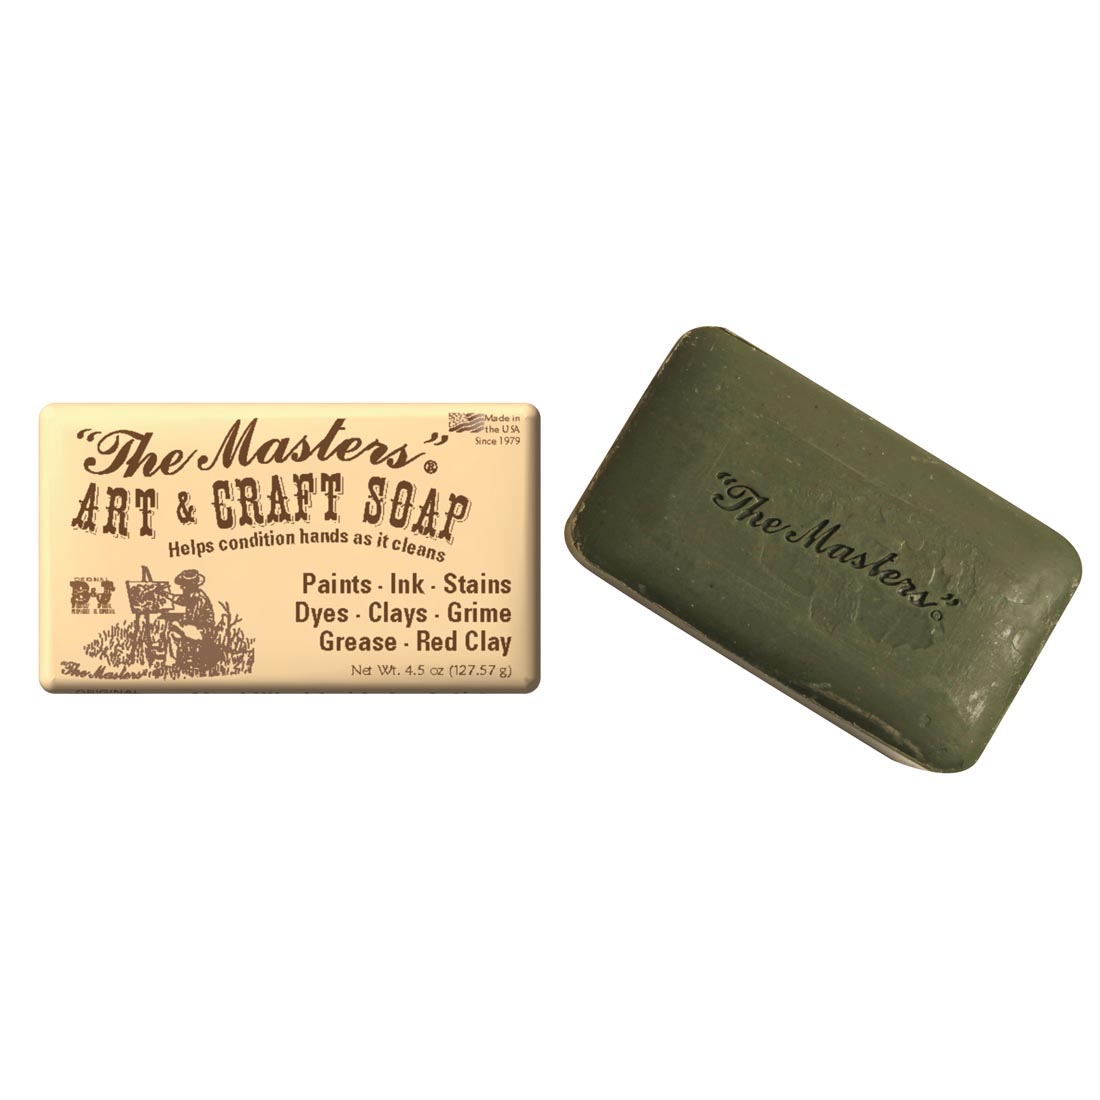 The Masters Hand Soap Bar shown both wrapped in packaging and without